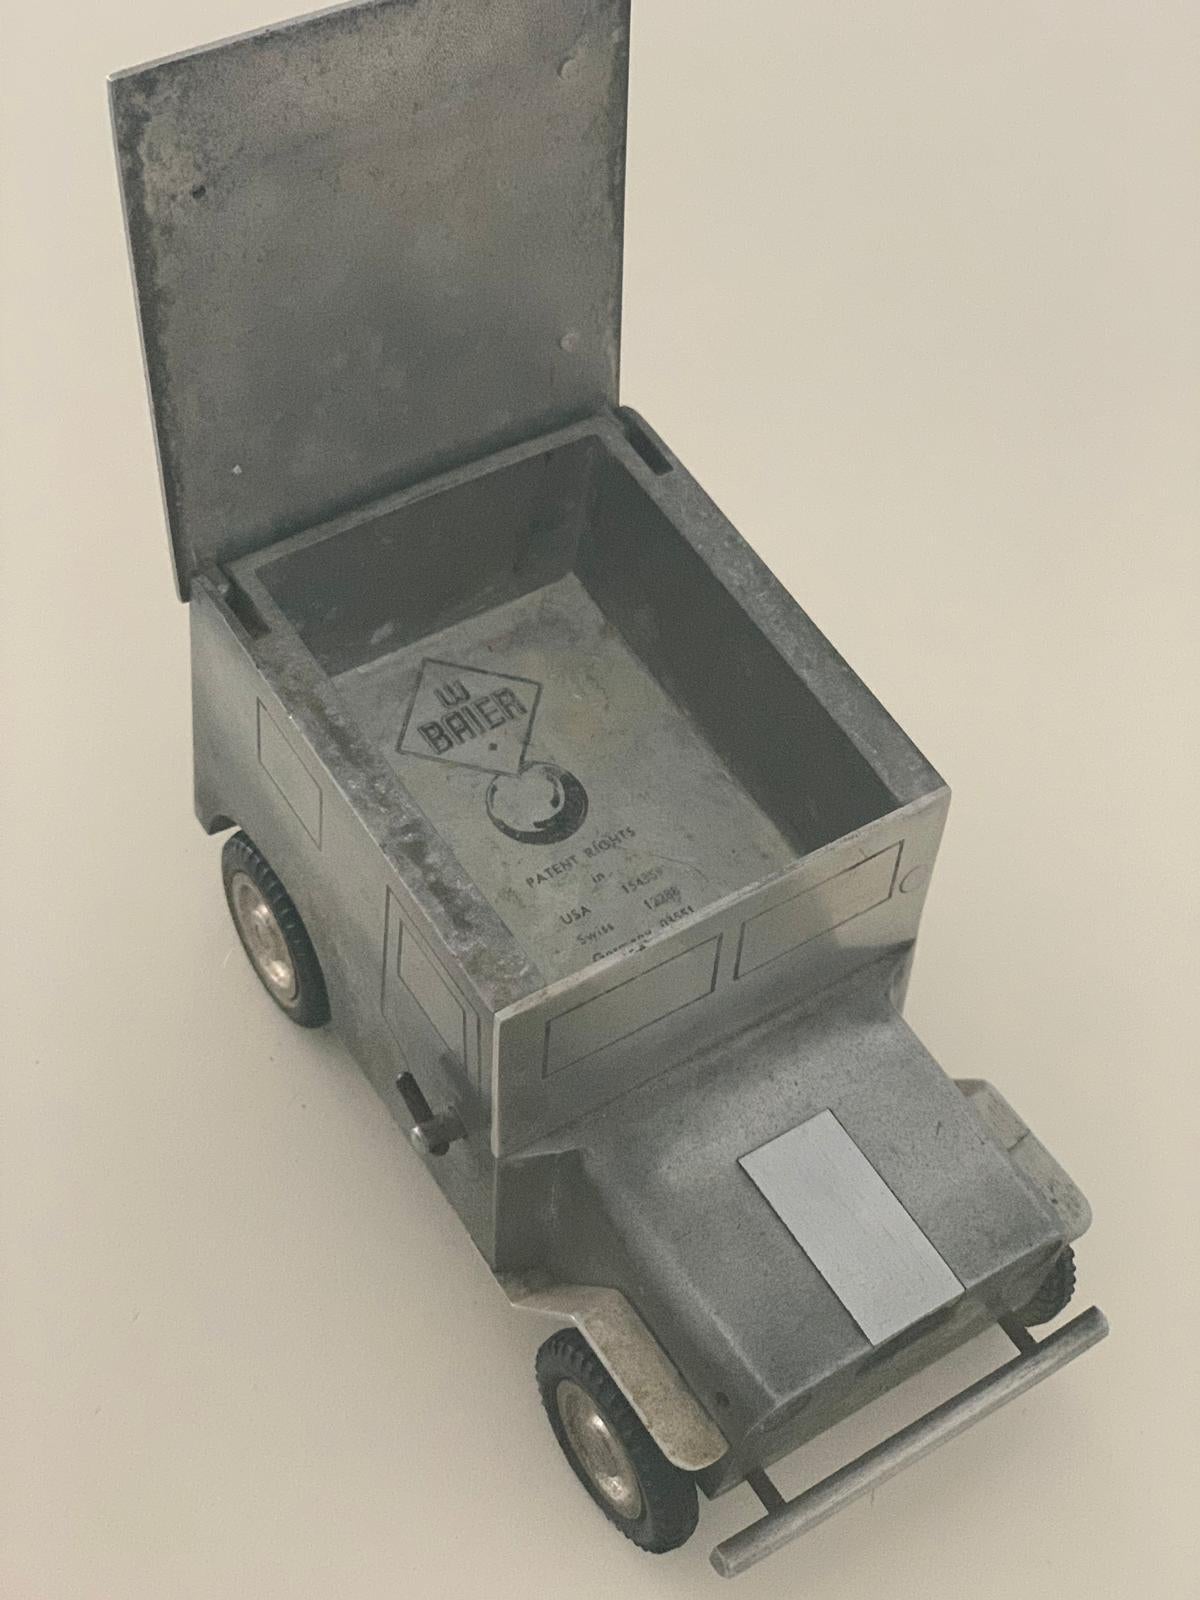 Table lighter, from 1948, in the form of a jeep. Made by the company Walter Baier made of aluminum. At the touch of a button, the lid opens and ignites the lighter. The lighter is in a good condition, used according to the age. The jumping mechanism